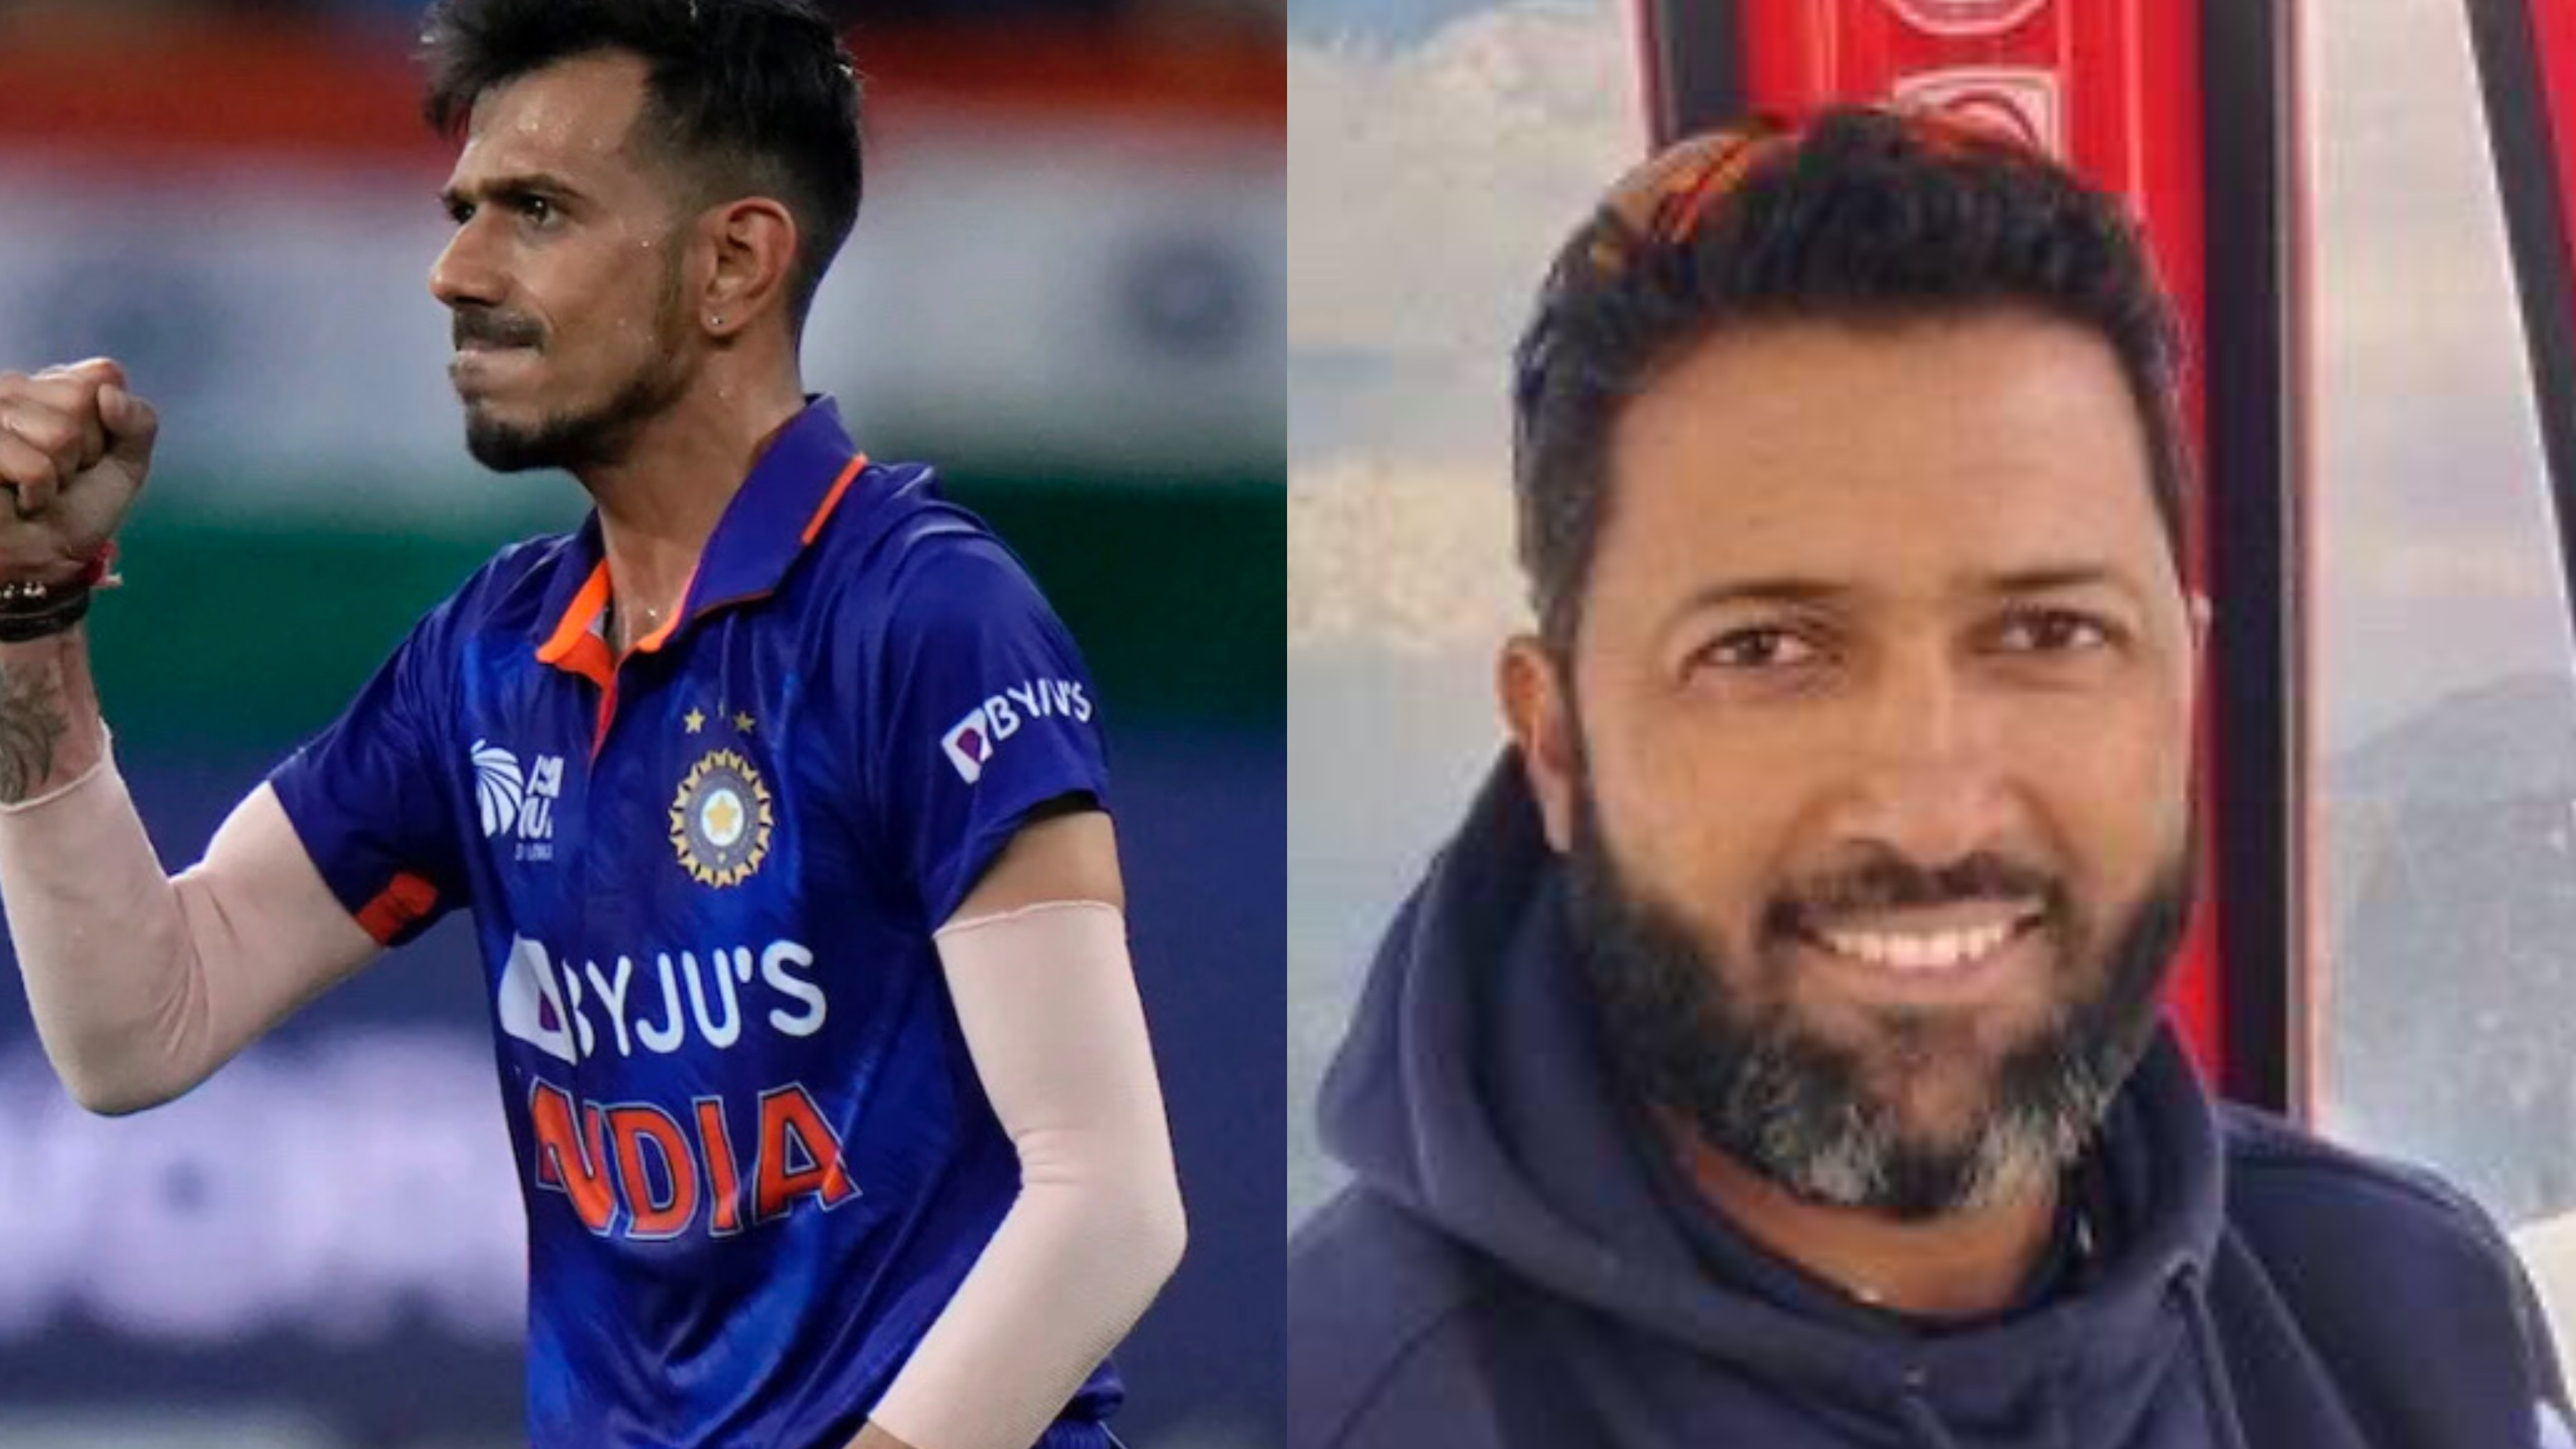 IND v AUS 2022: Chahal as main spinner in T20 World Cup, a matter of concern- Jaffer suggests to look at youngsters